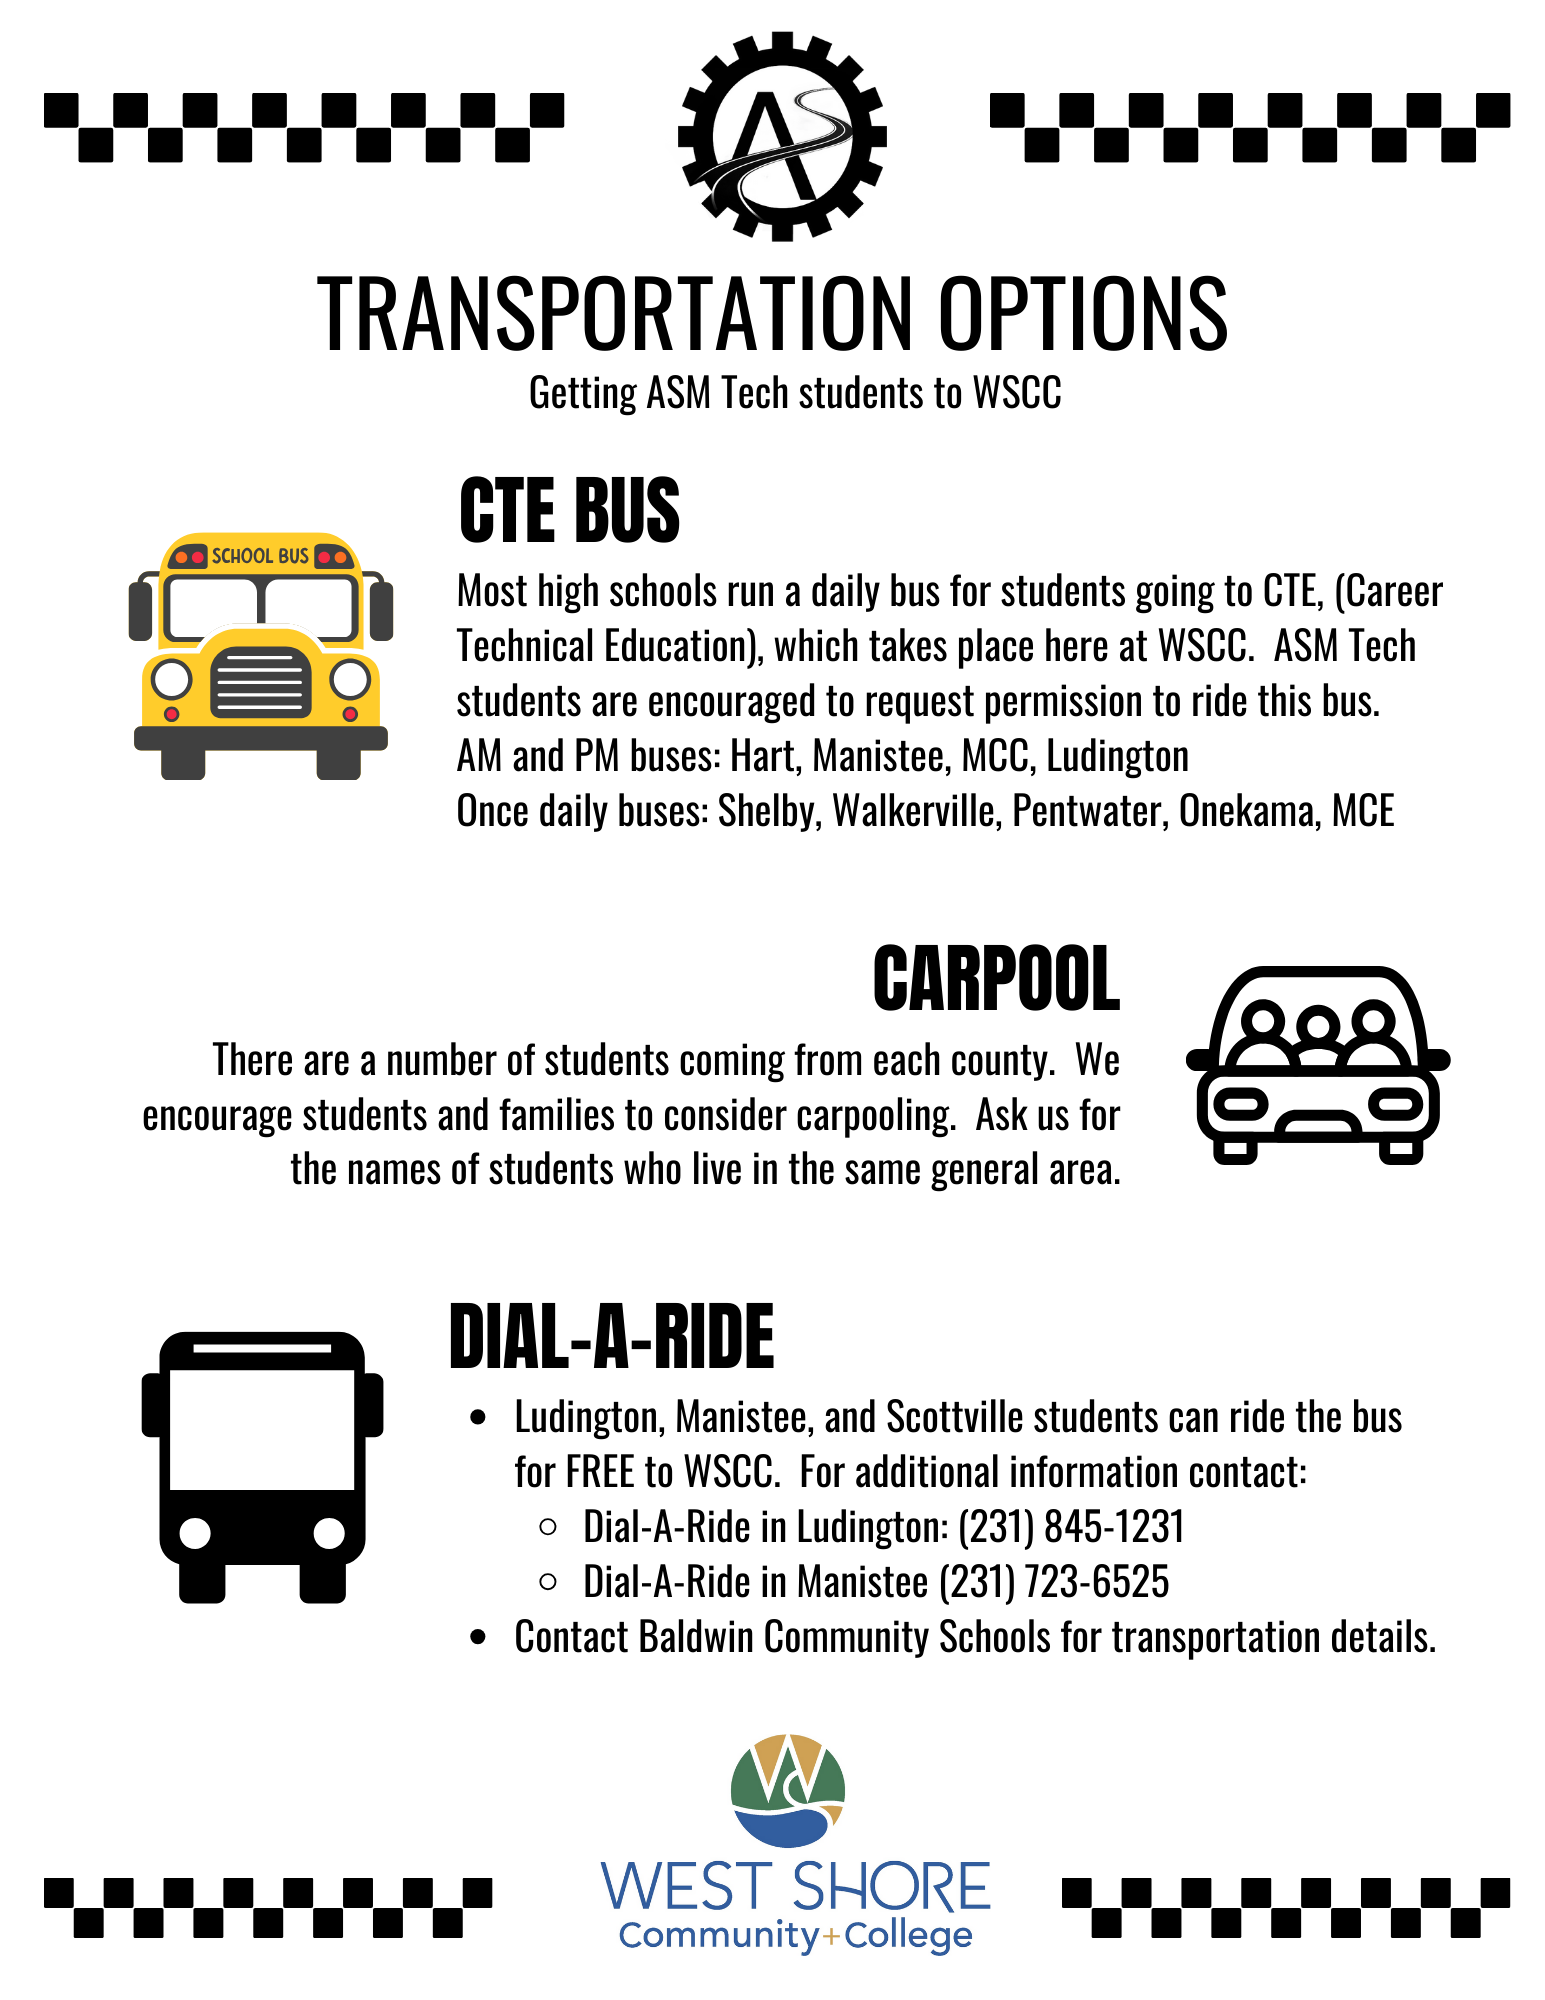 Transportation Options to WSCC for ASM Tech Students